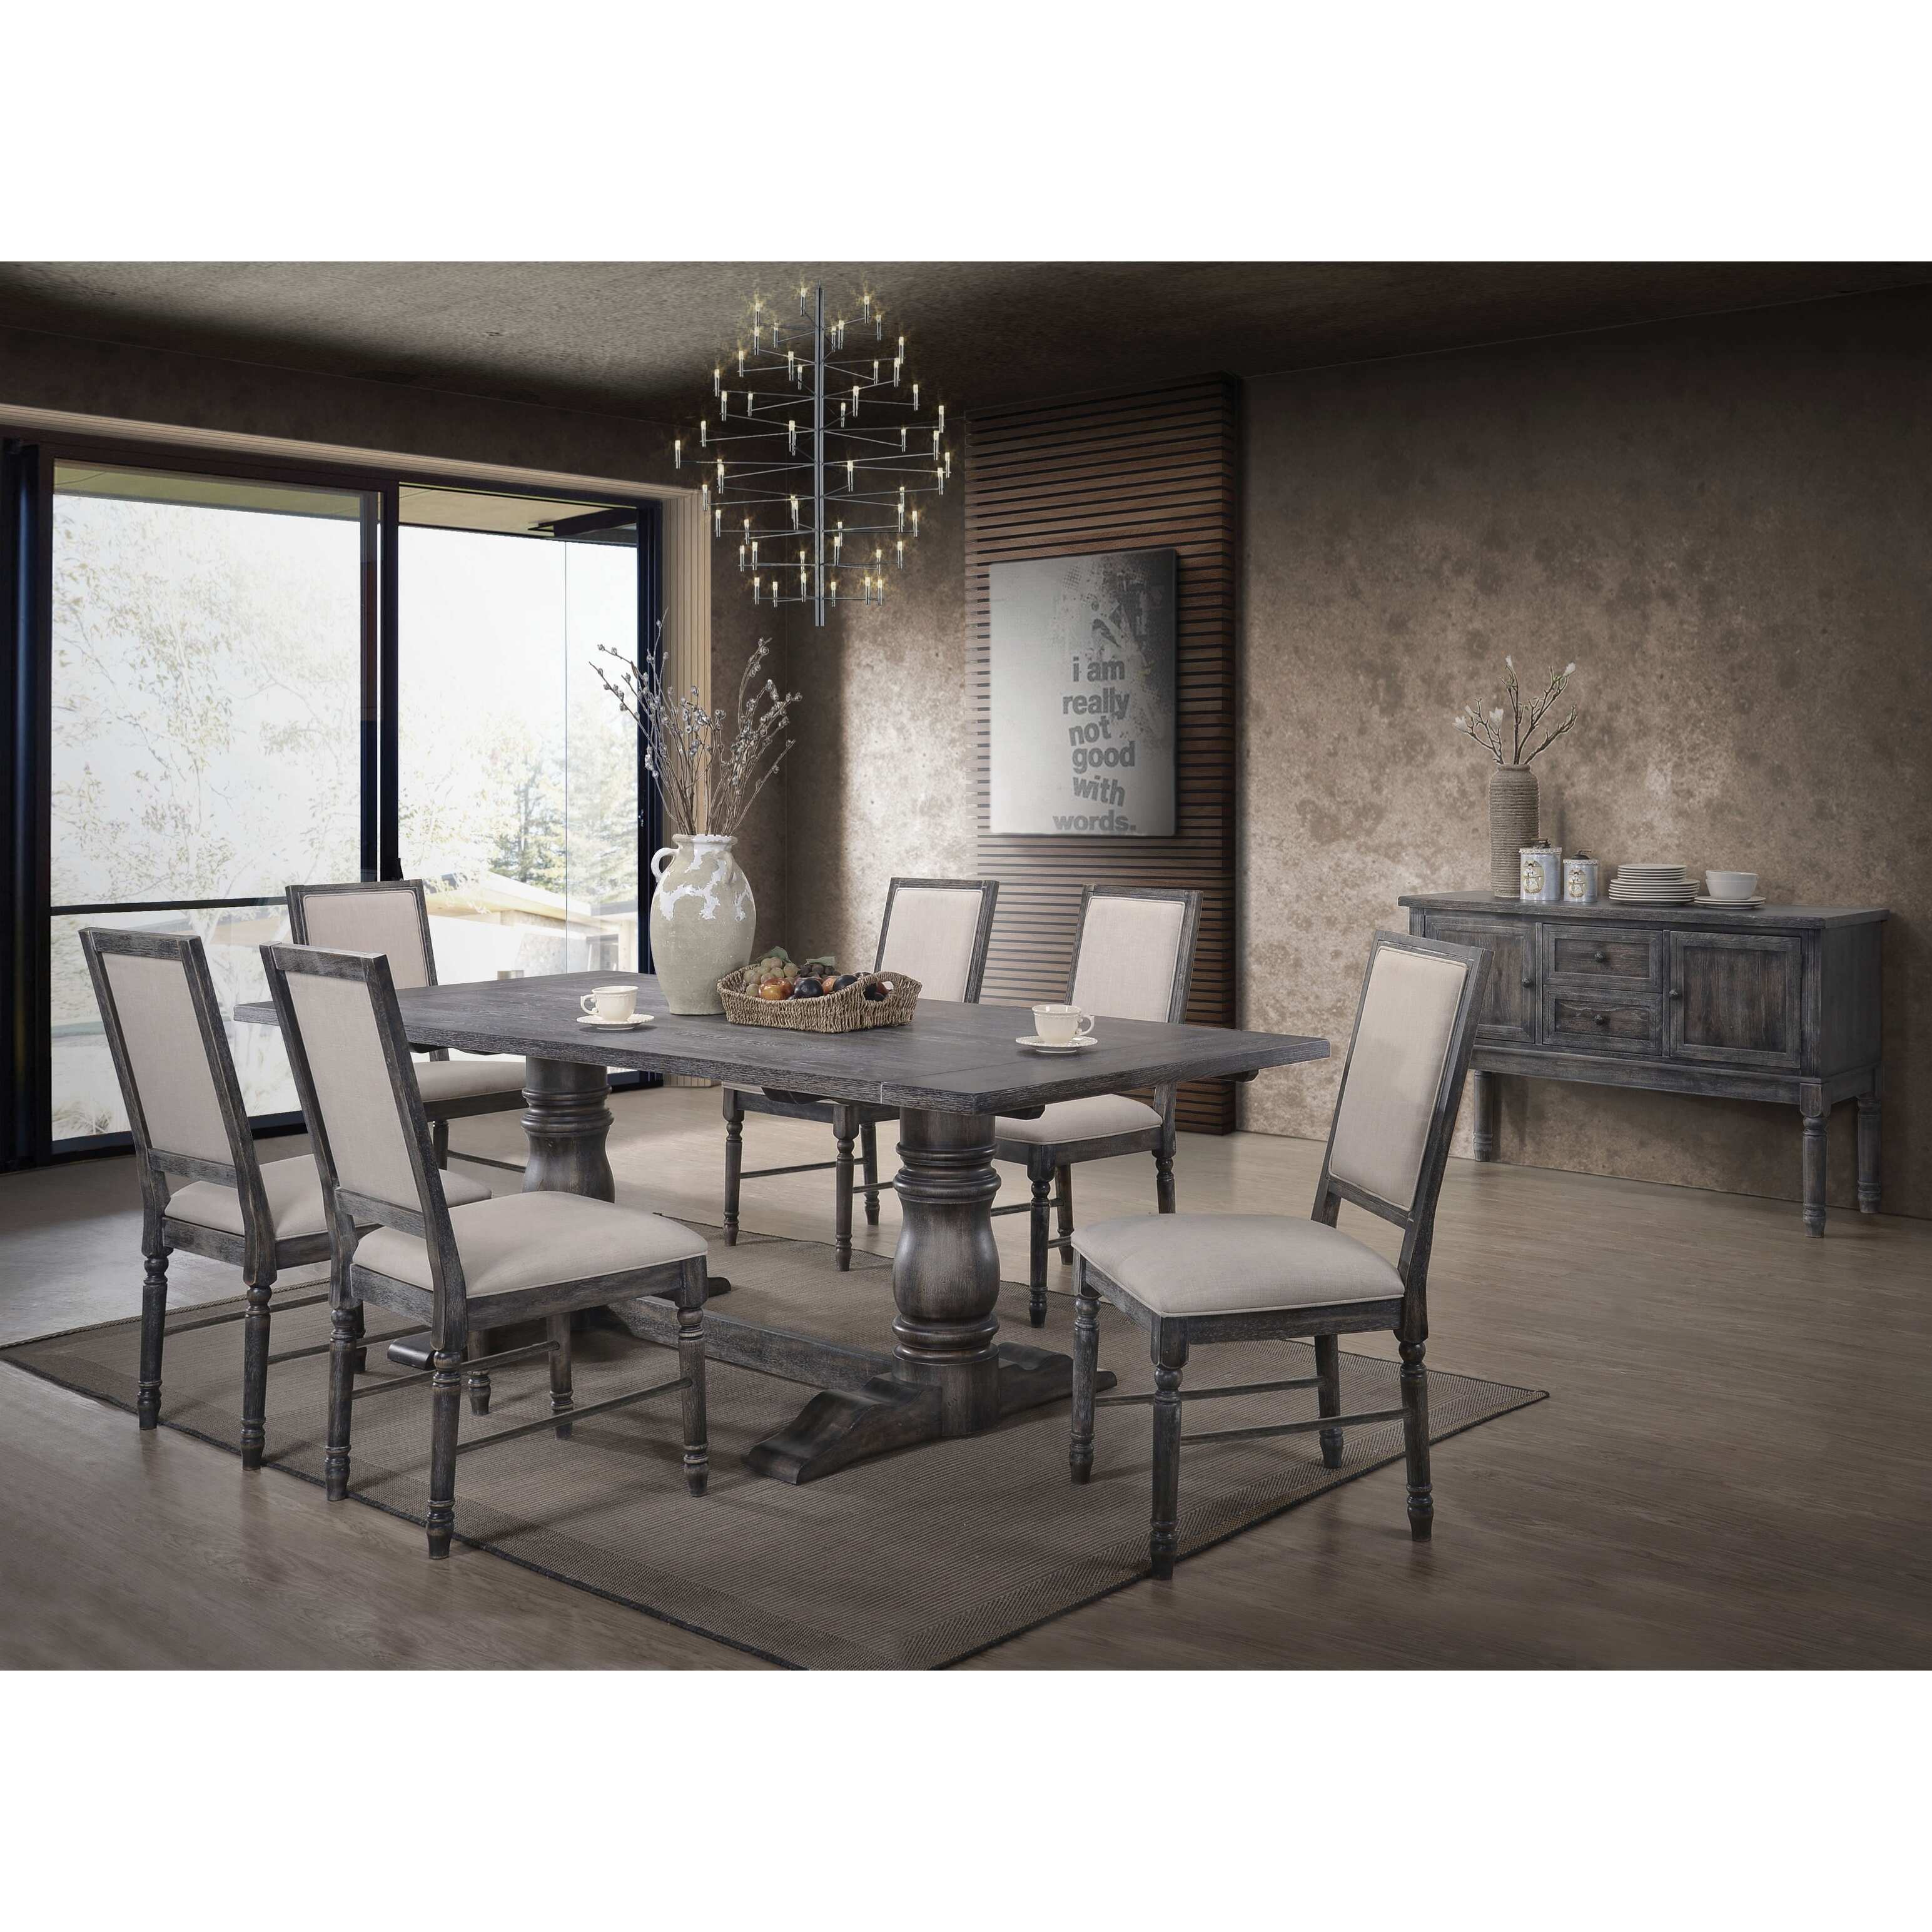 ACME Leventis II Dining Table in Weathered Gray